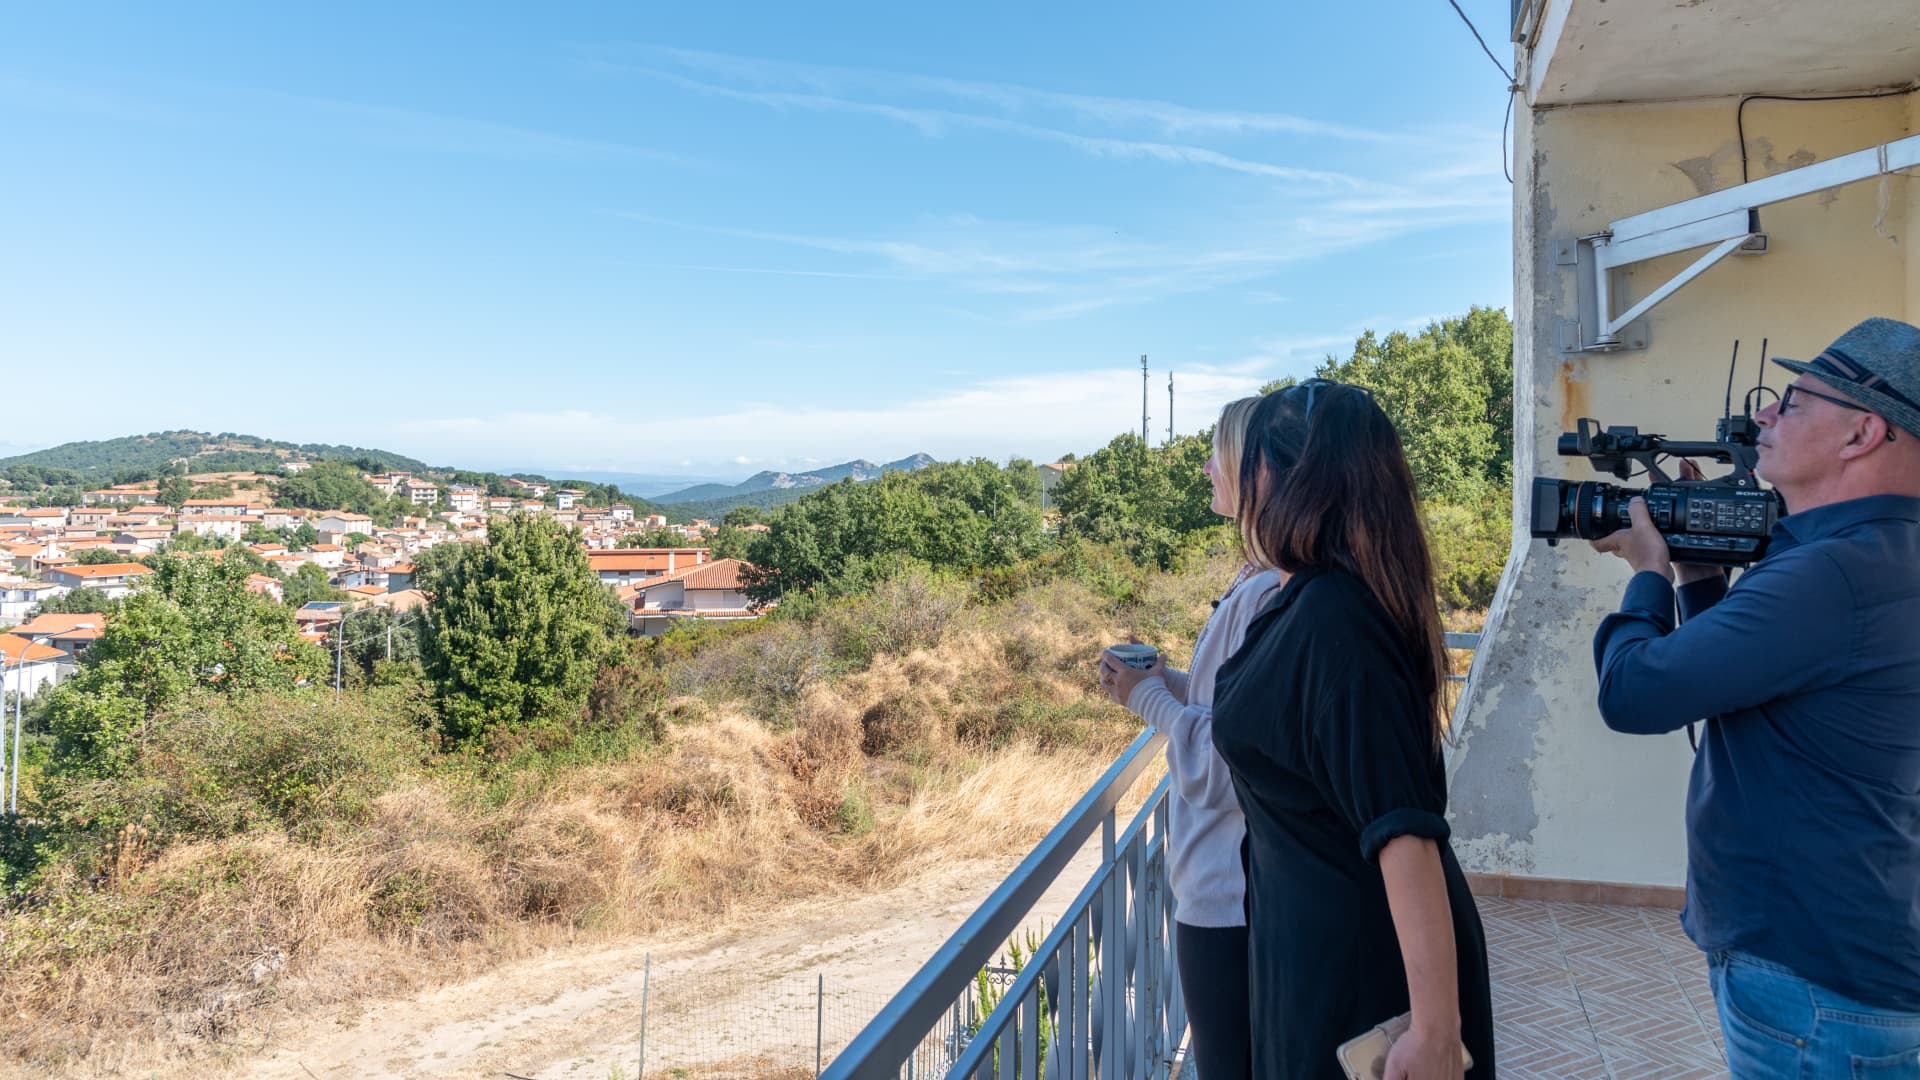 Partis overlooks the view from her balcony, with Veronica Matta, who is overseeing the 